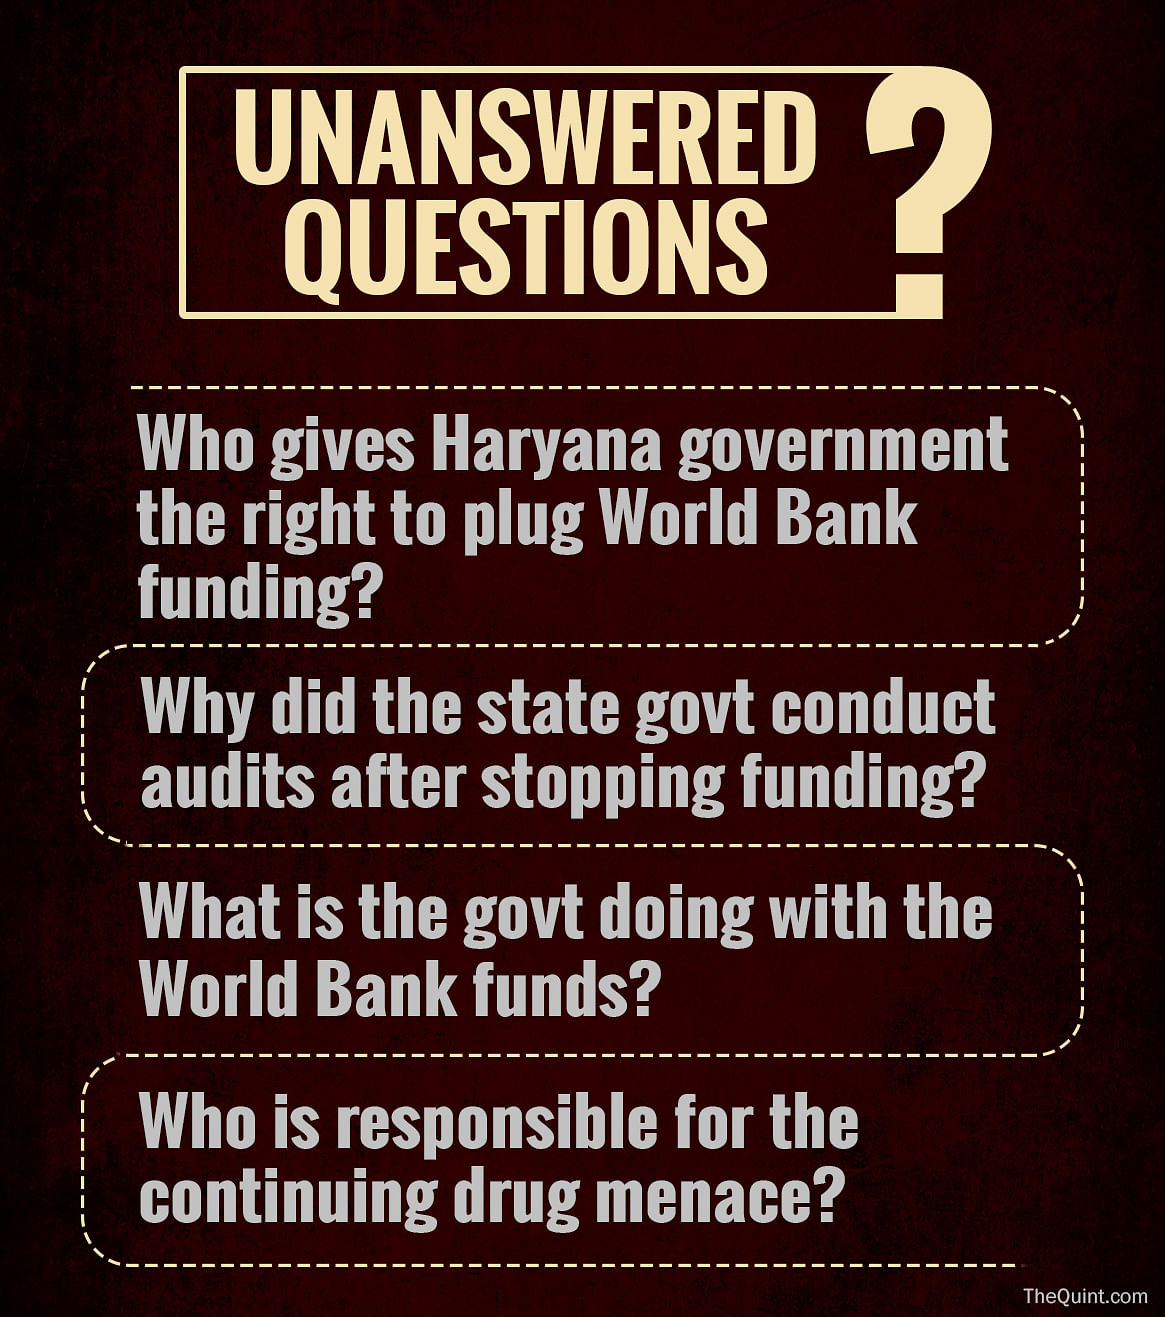 Haryana Govt stopped distributing World Bank funds to NGOs working with drug users. The Quint investigates.